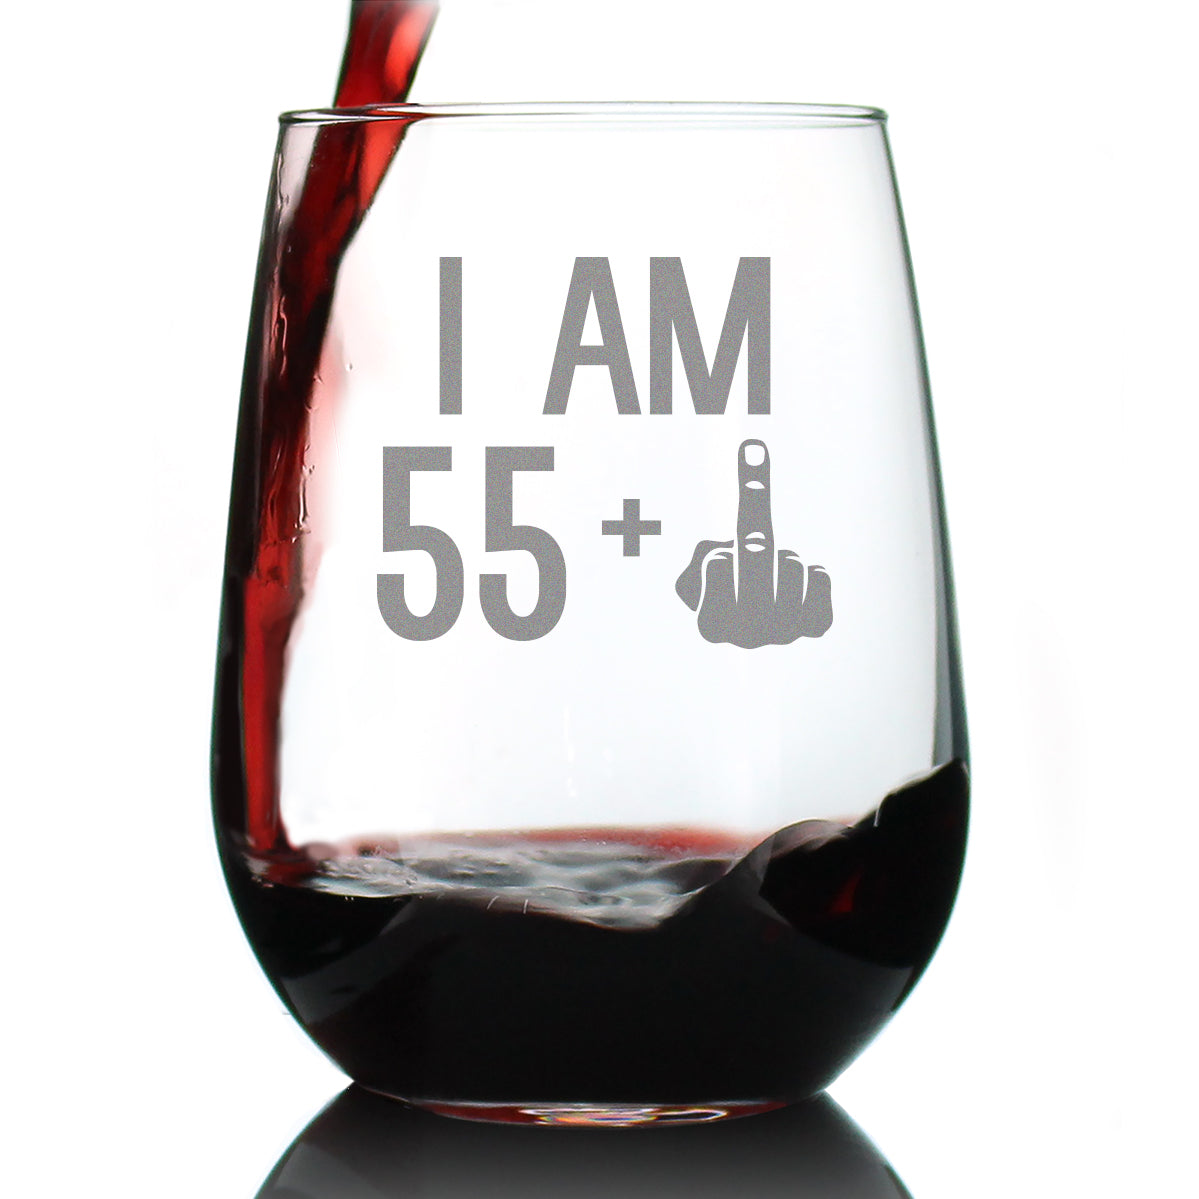 I Am 55 + 1 Middle Finger Funny Stemless Wine Glass, Large 17 Ounce Size, Etched Sayings, 56th Birthday Gift for Women Turning 56